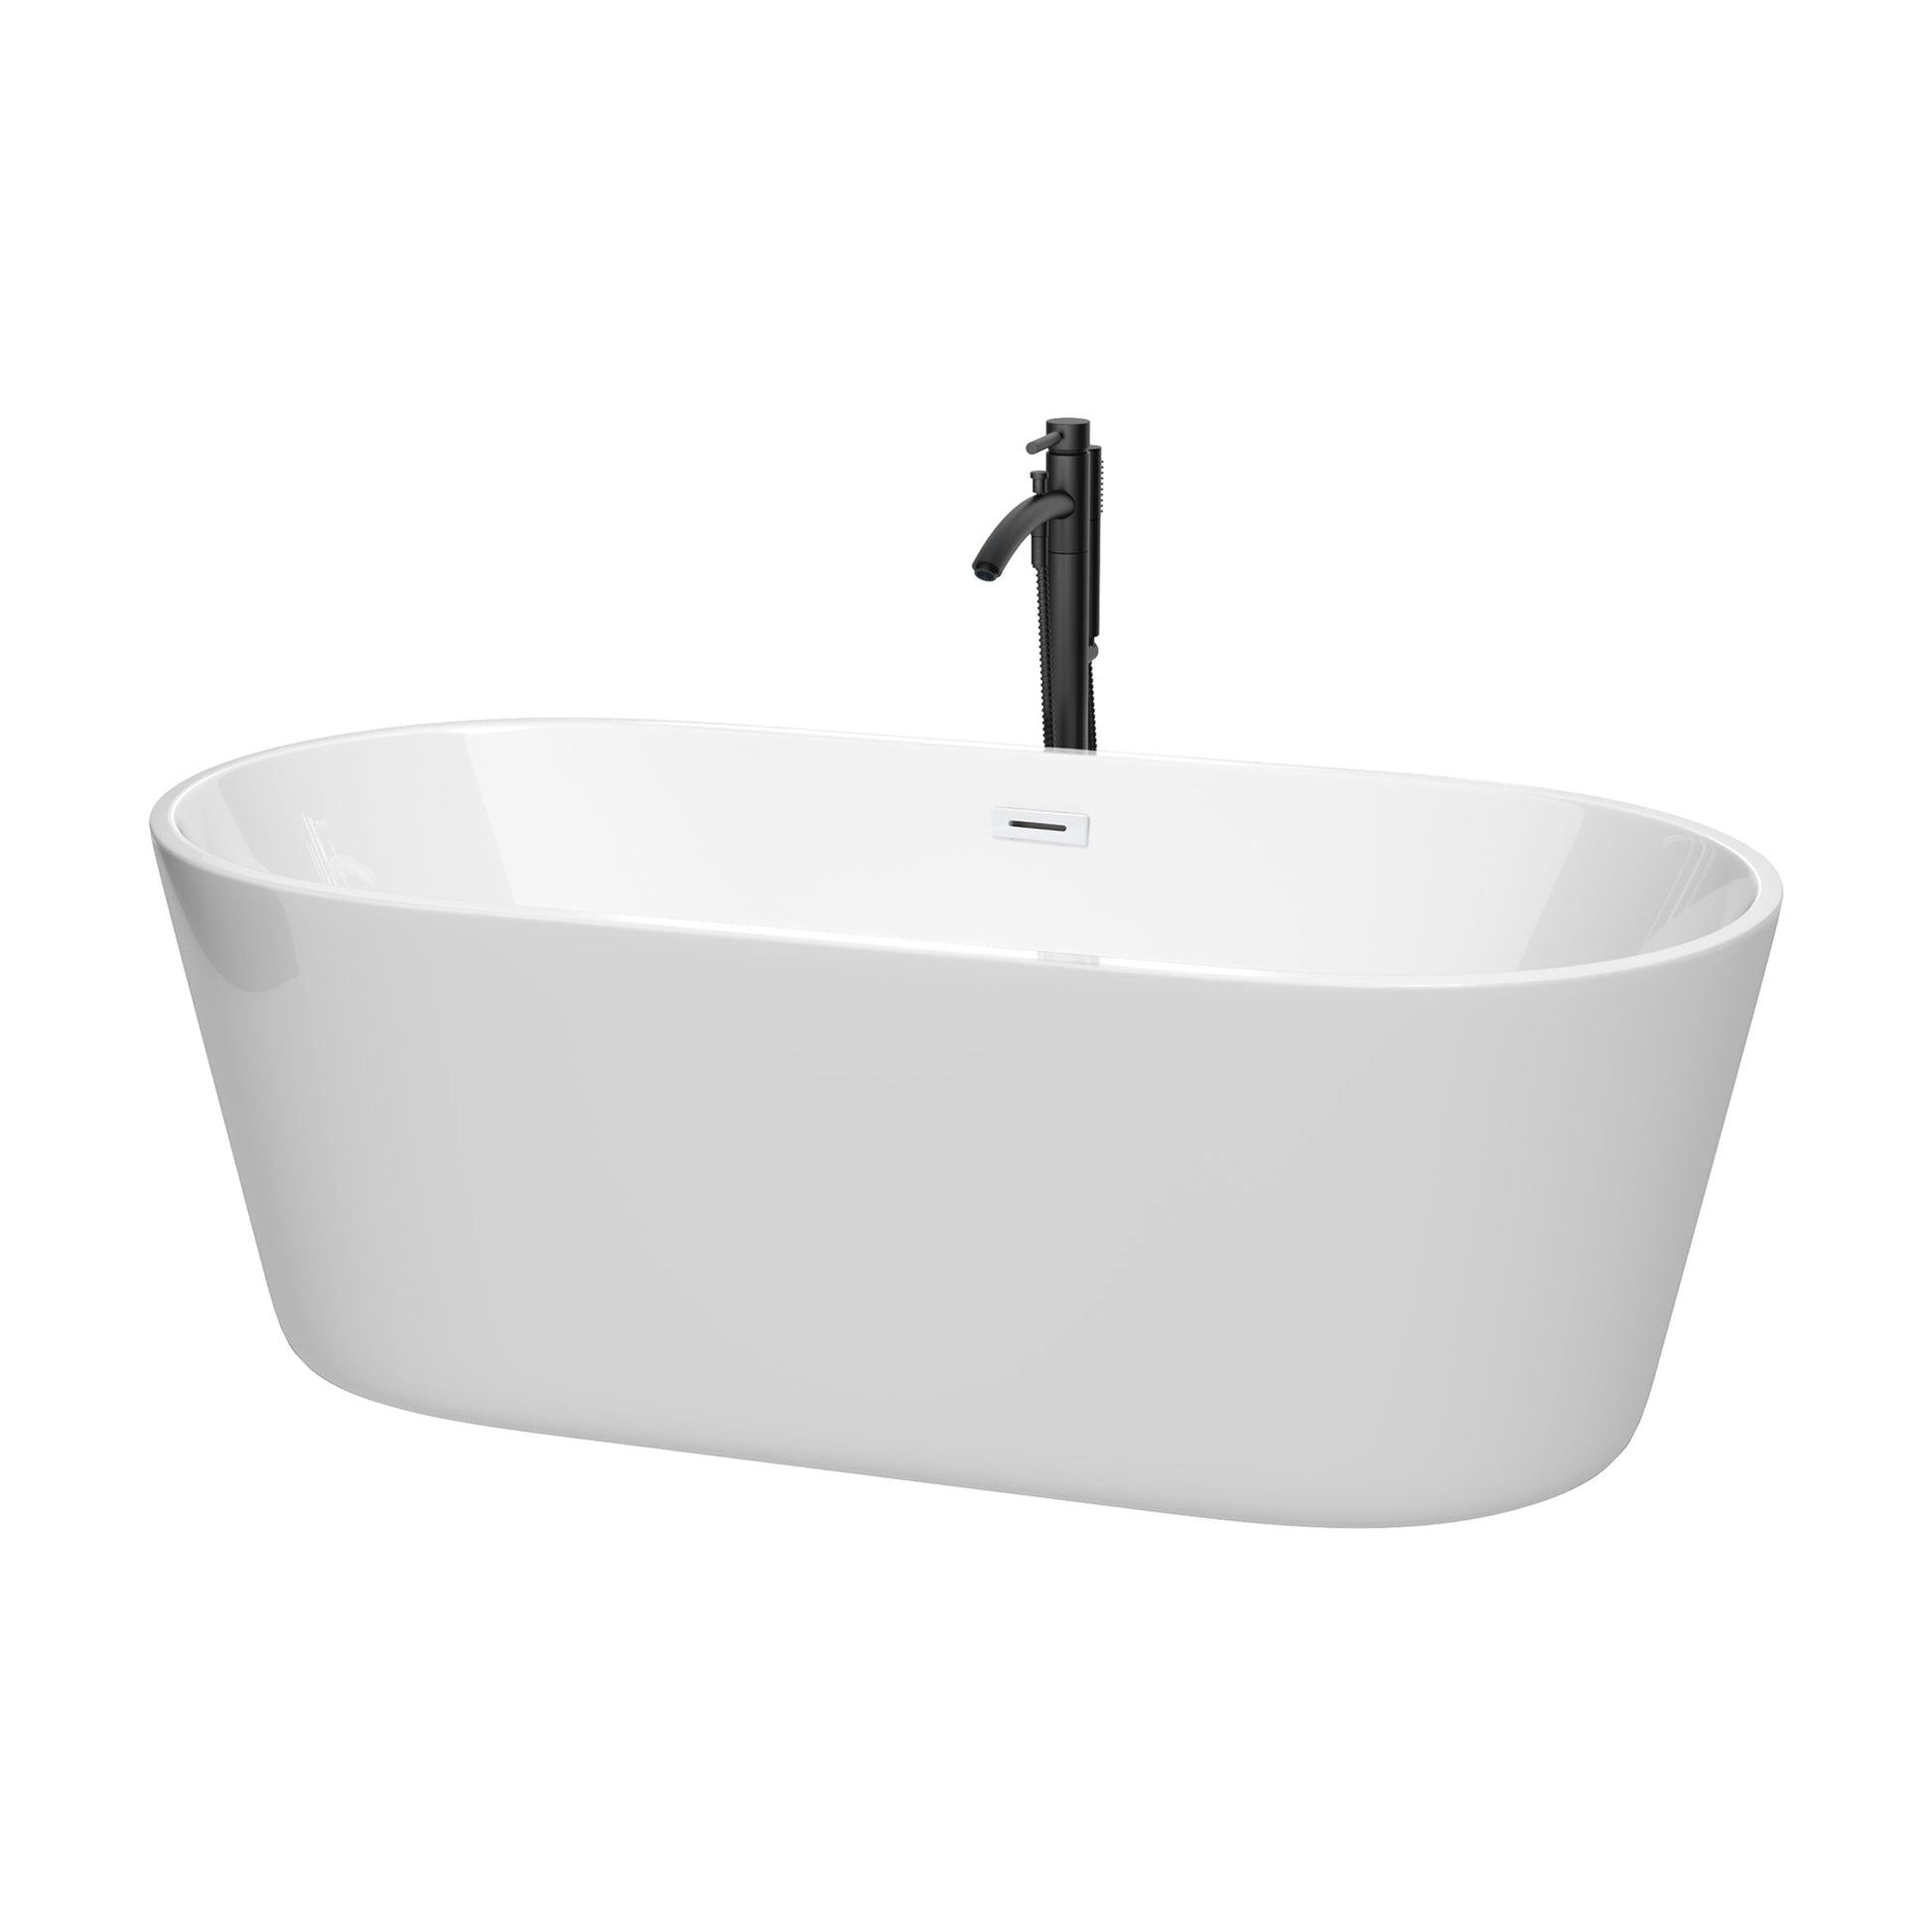 Wyndham Collection Carissa 67" Freestanding Bathtub in White With Shiny White Trim and Floor Mounted Faucet in Matte Black